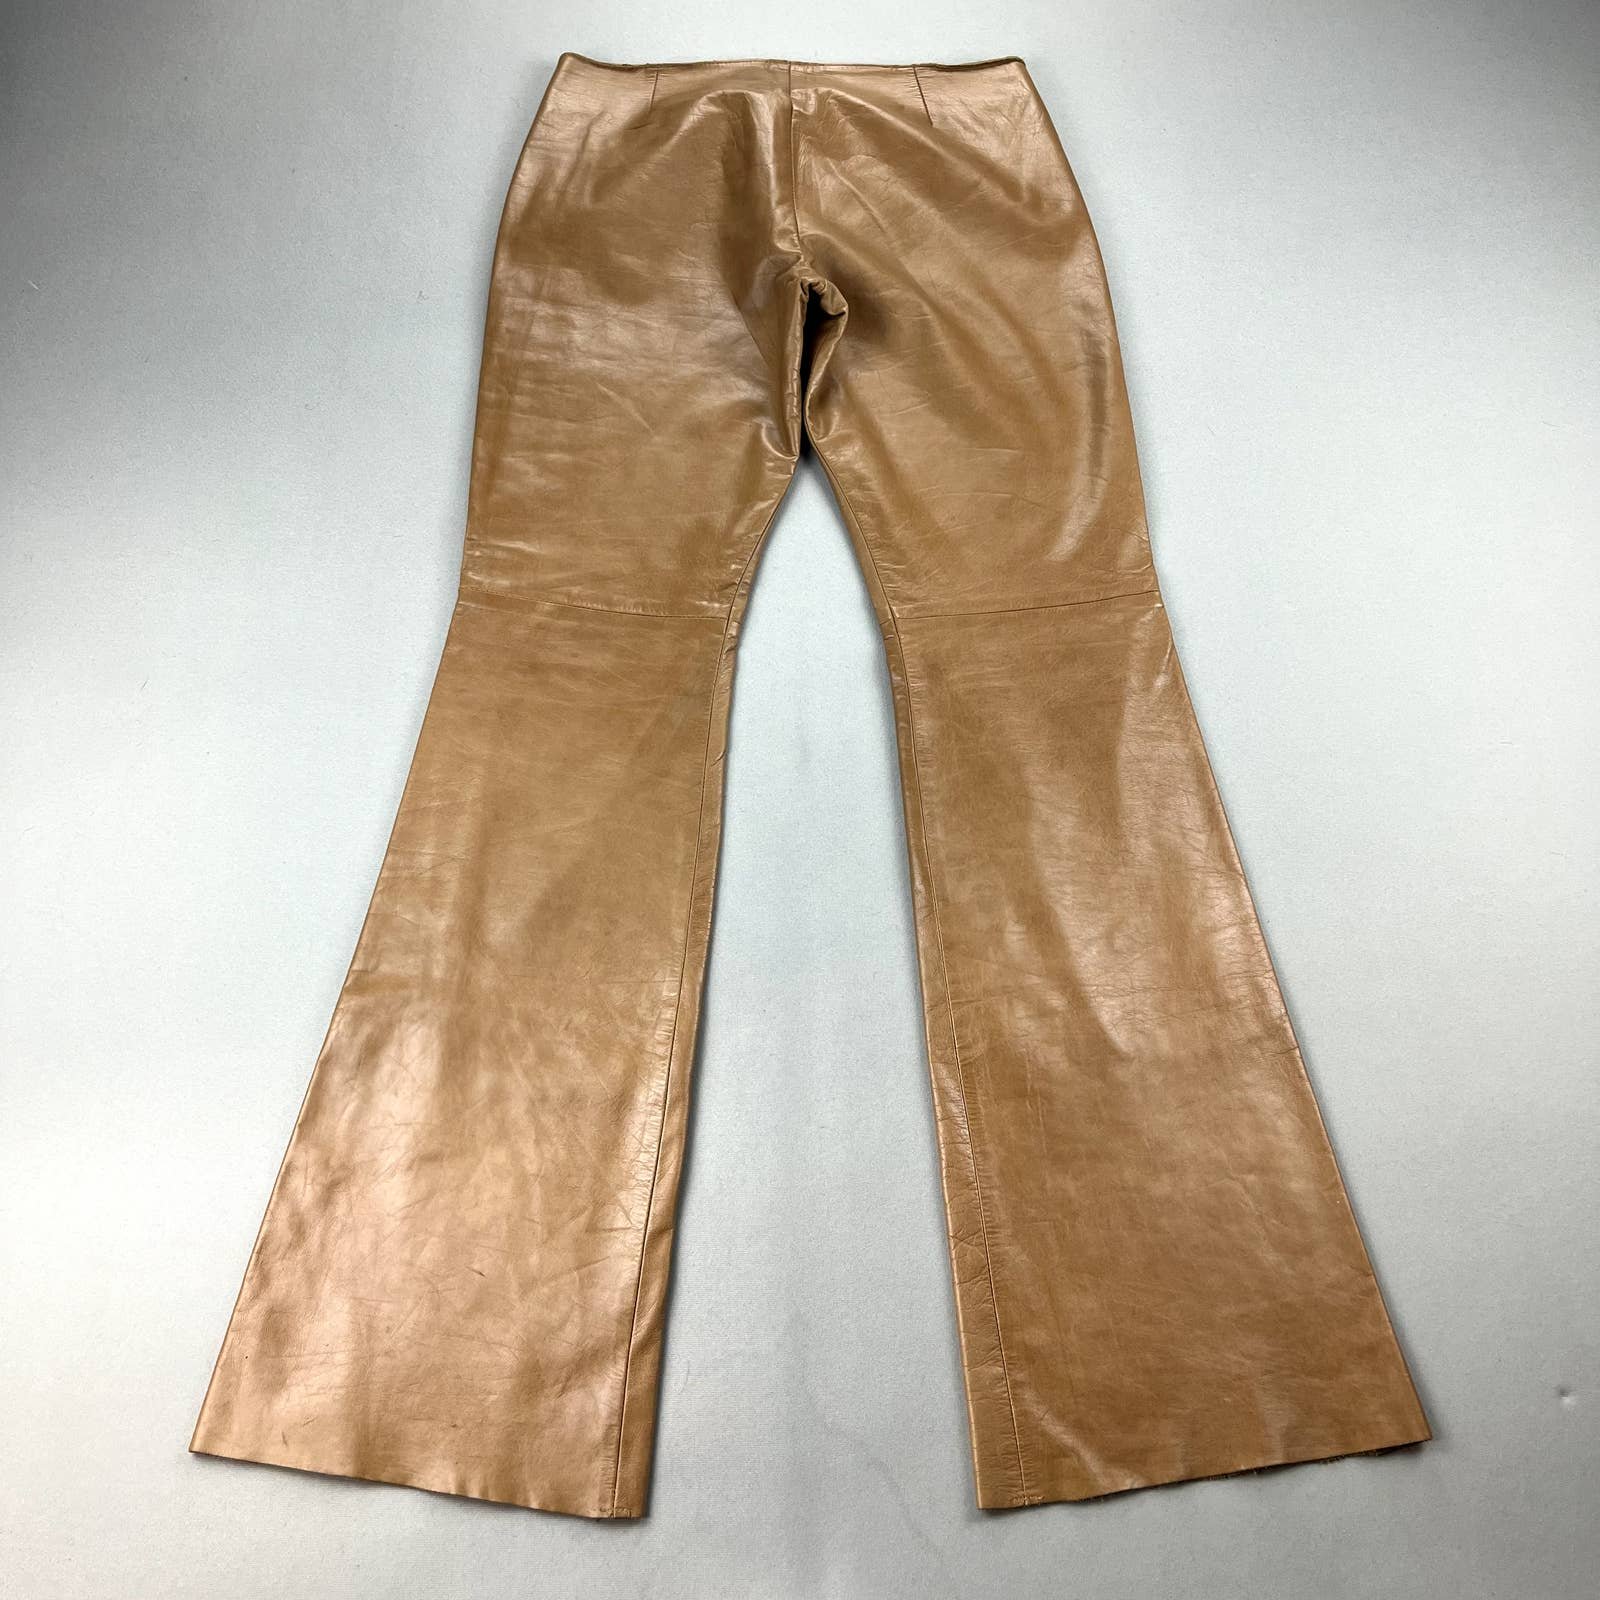 reasonable price Vintage Leather Flare Pants Womens 8 Tan Brown Bisou Bisou Michele Bohbot 90s hW7tbhUsC Factory Price